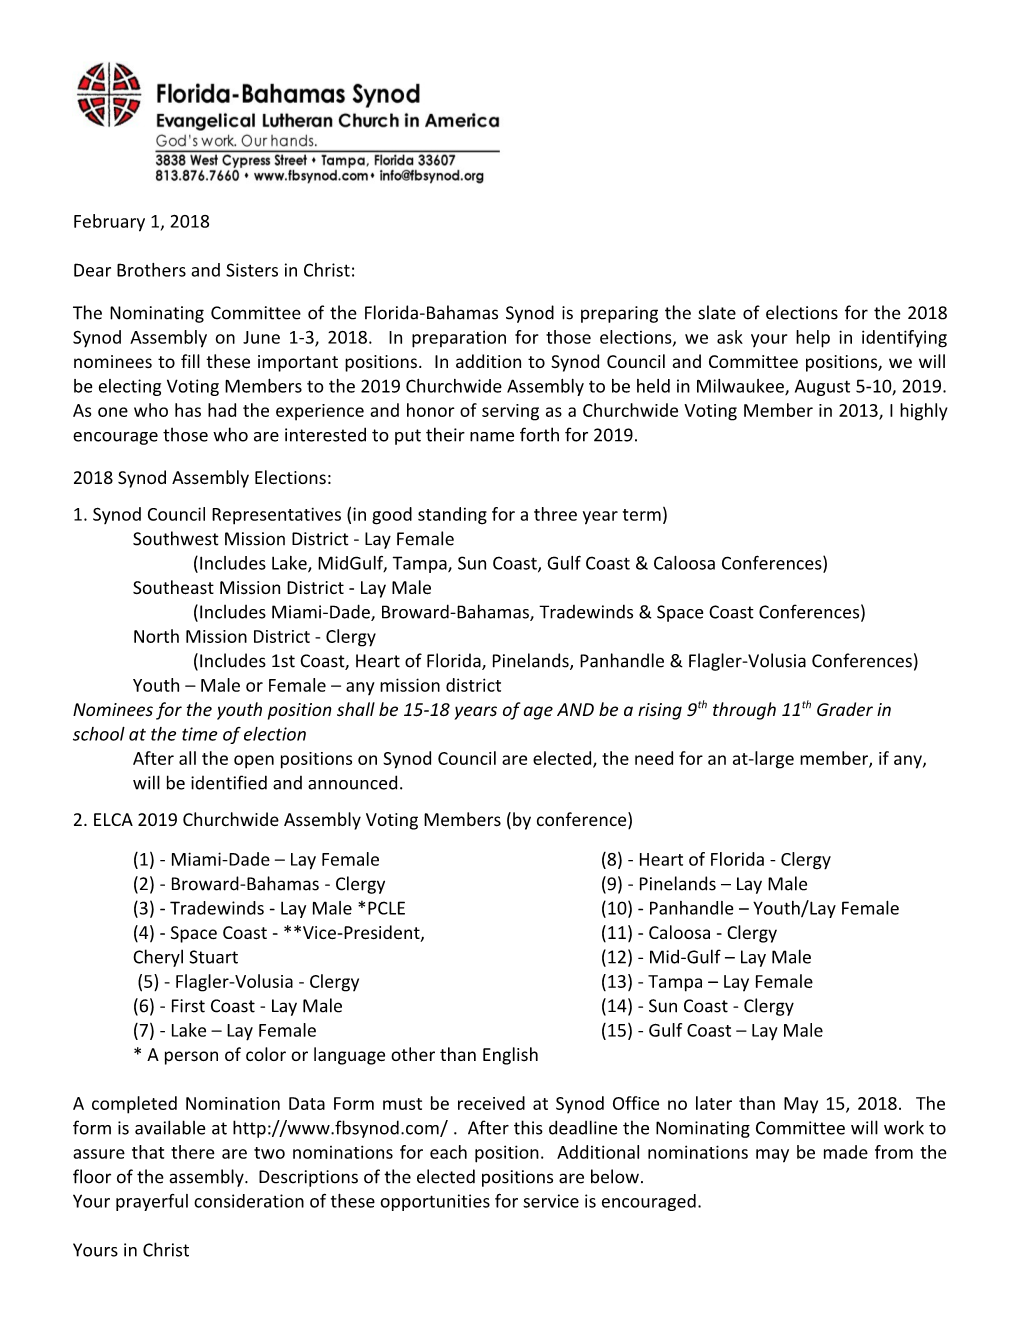 Nominating Letter to Congregations 2011